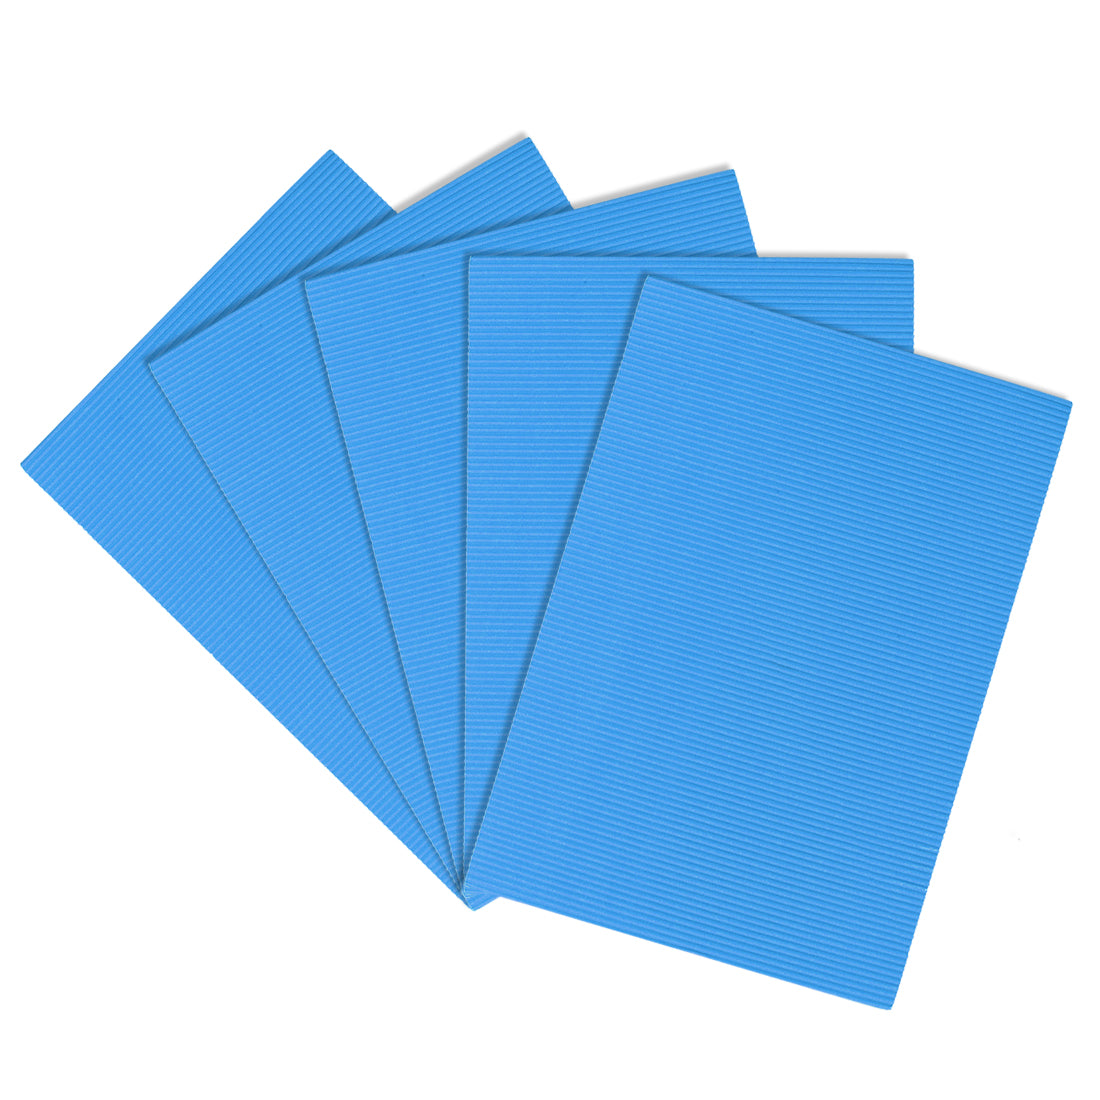 uxcell Uxcell 5pcs Corrugated Cardboard Paper Sheets,Light Blue,7.87-inch  x 11.90-inch